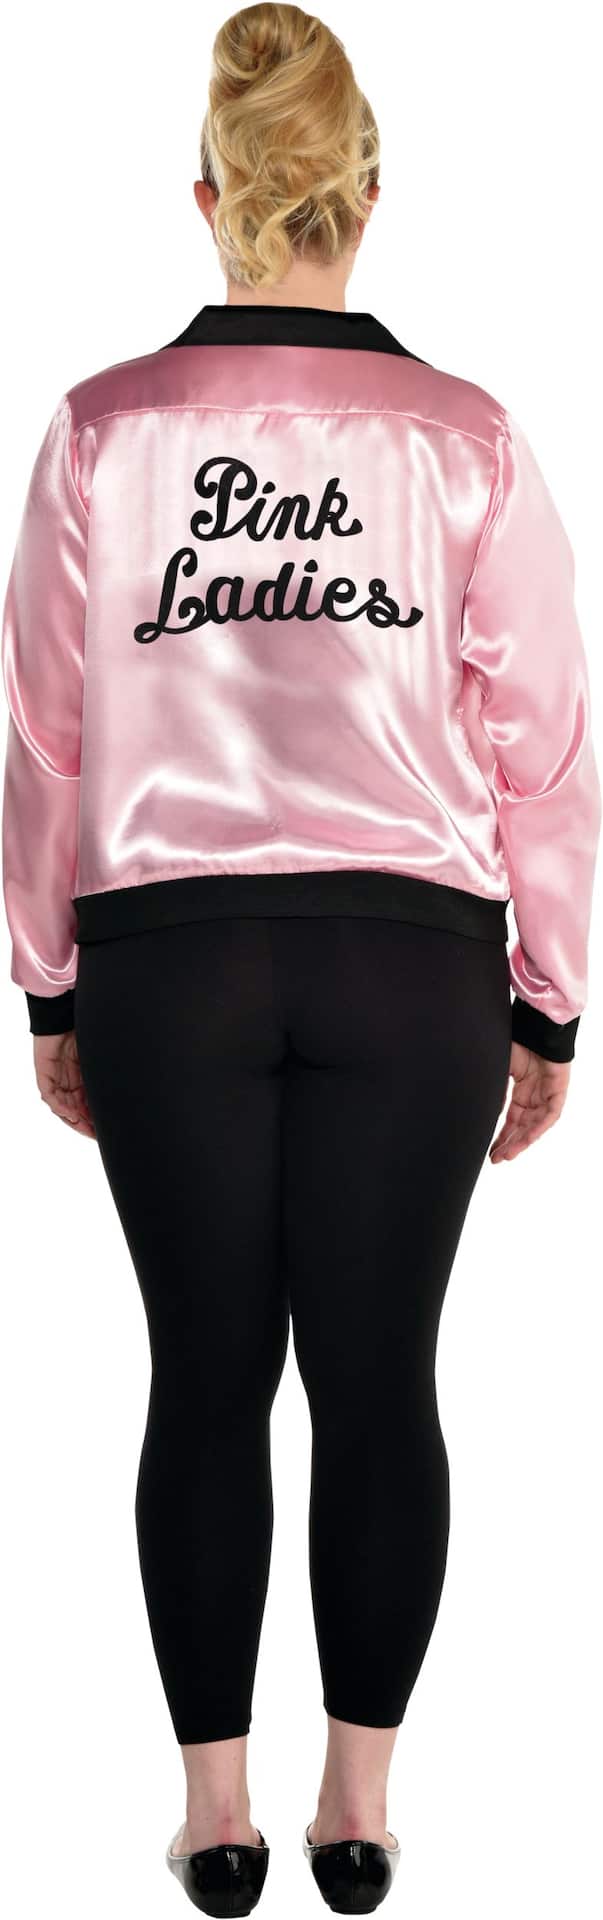 Amplify Legging - Cotton Candy - Pink